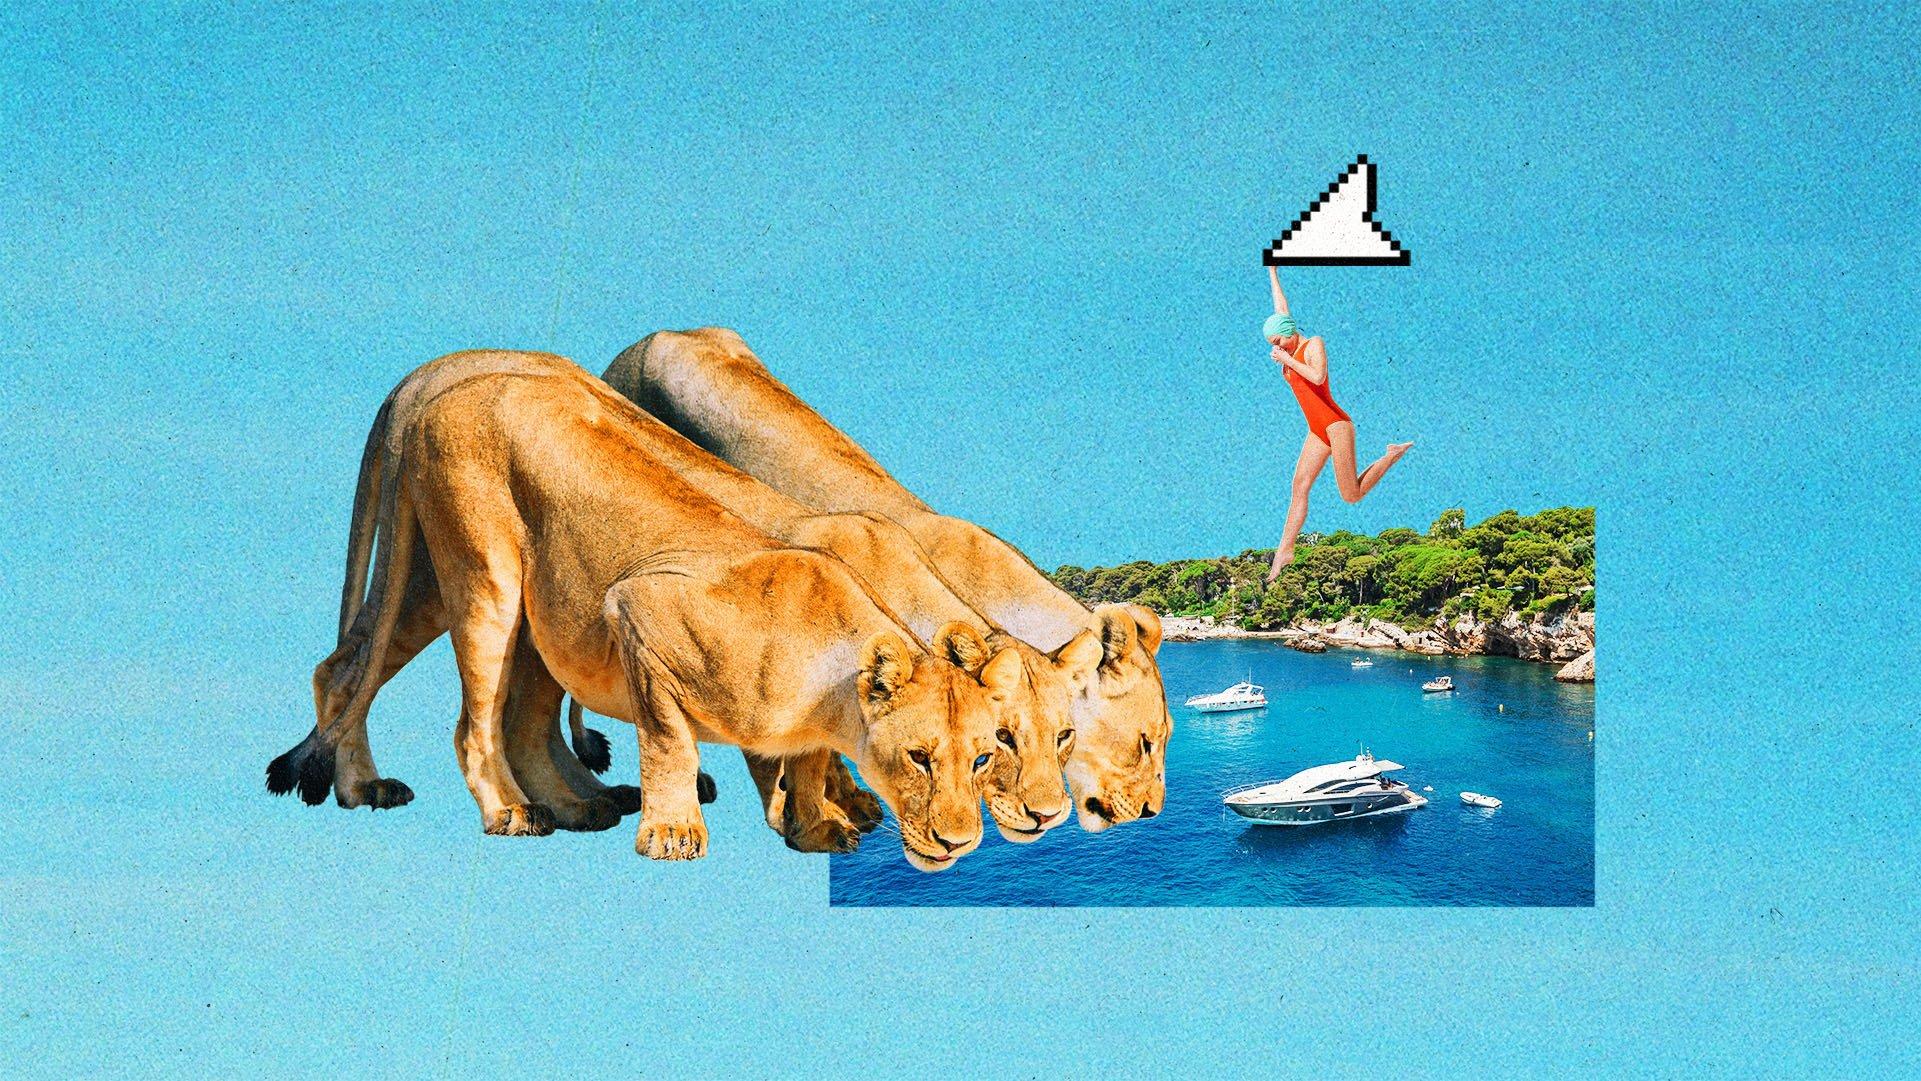 Three lionesses bending down to drink for a mediterranean bay with yachts. A woman with a swim cap is held over the water by a pixelated cursor.